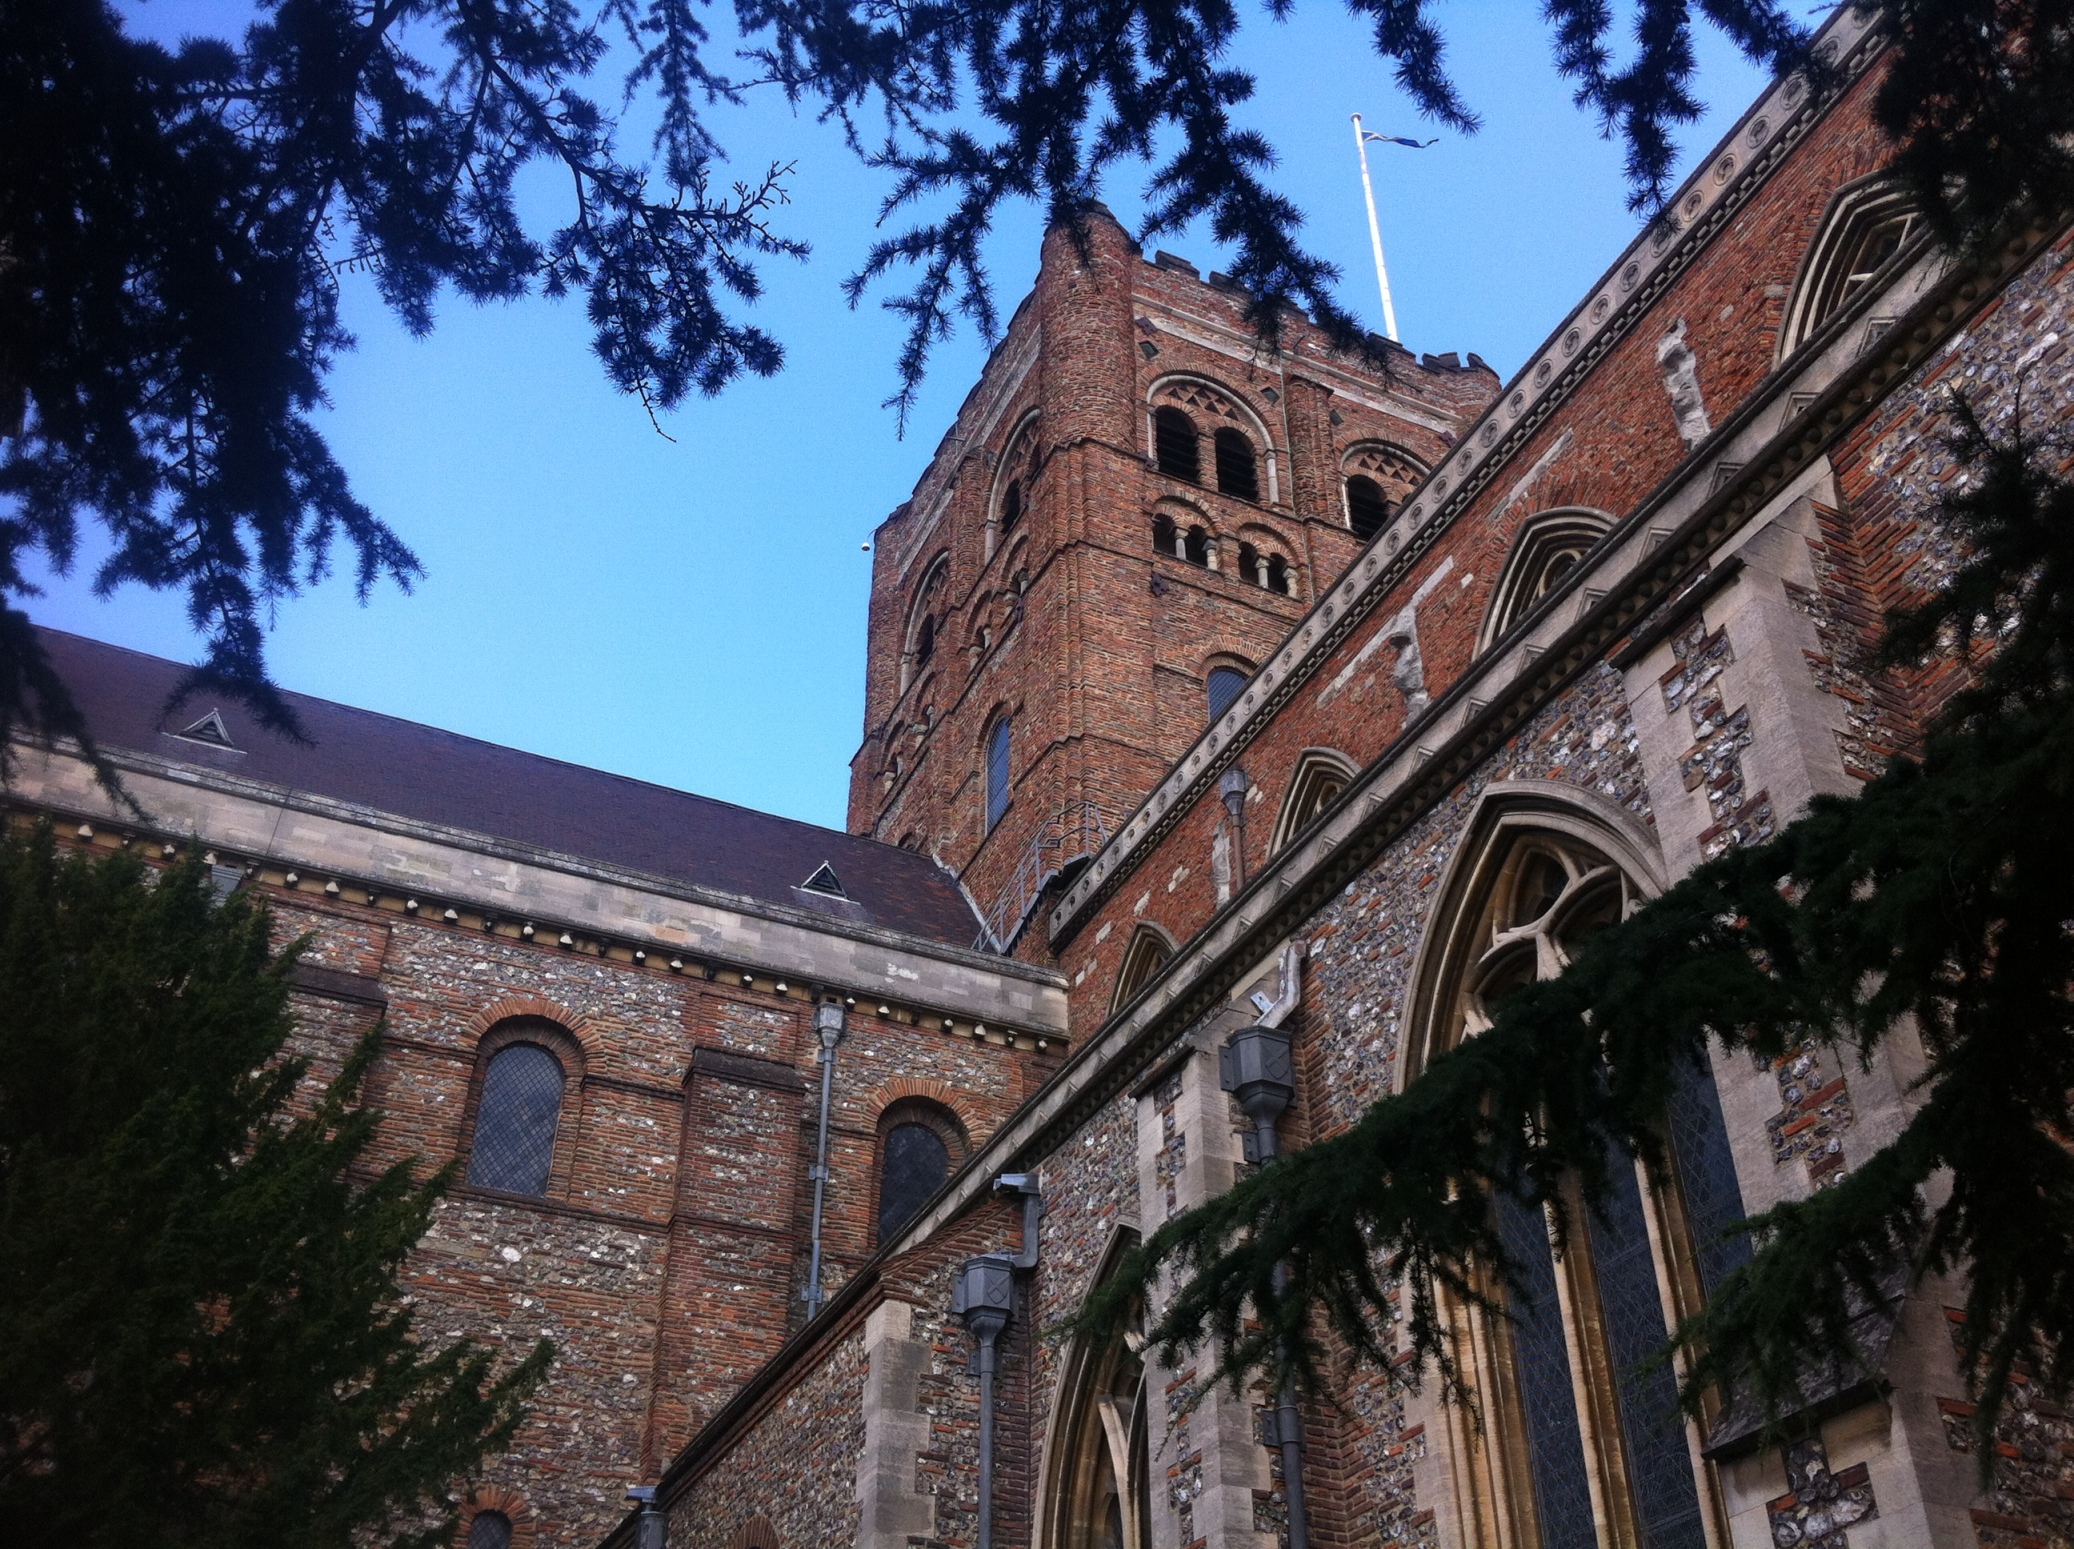 The Cross Tower of St. Albans Cathedral 